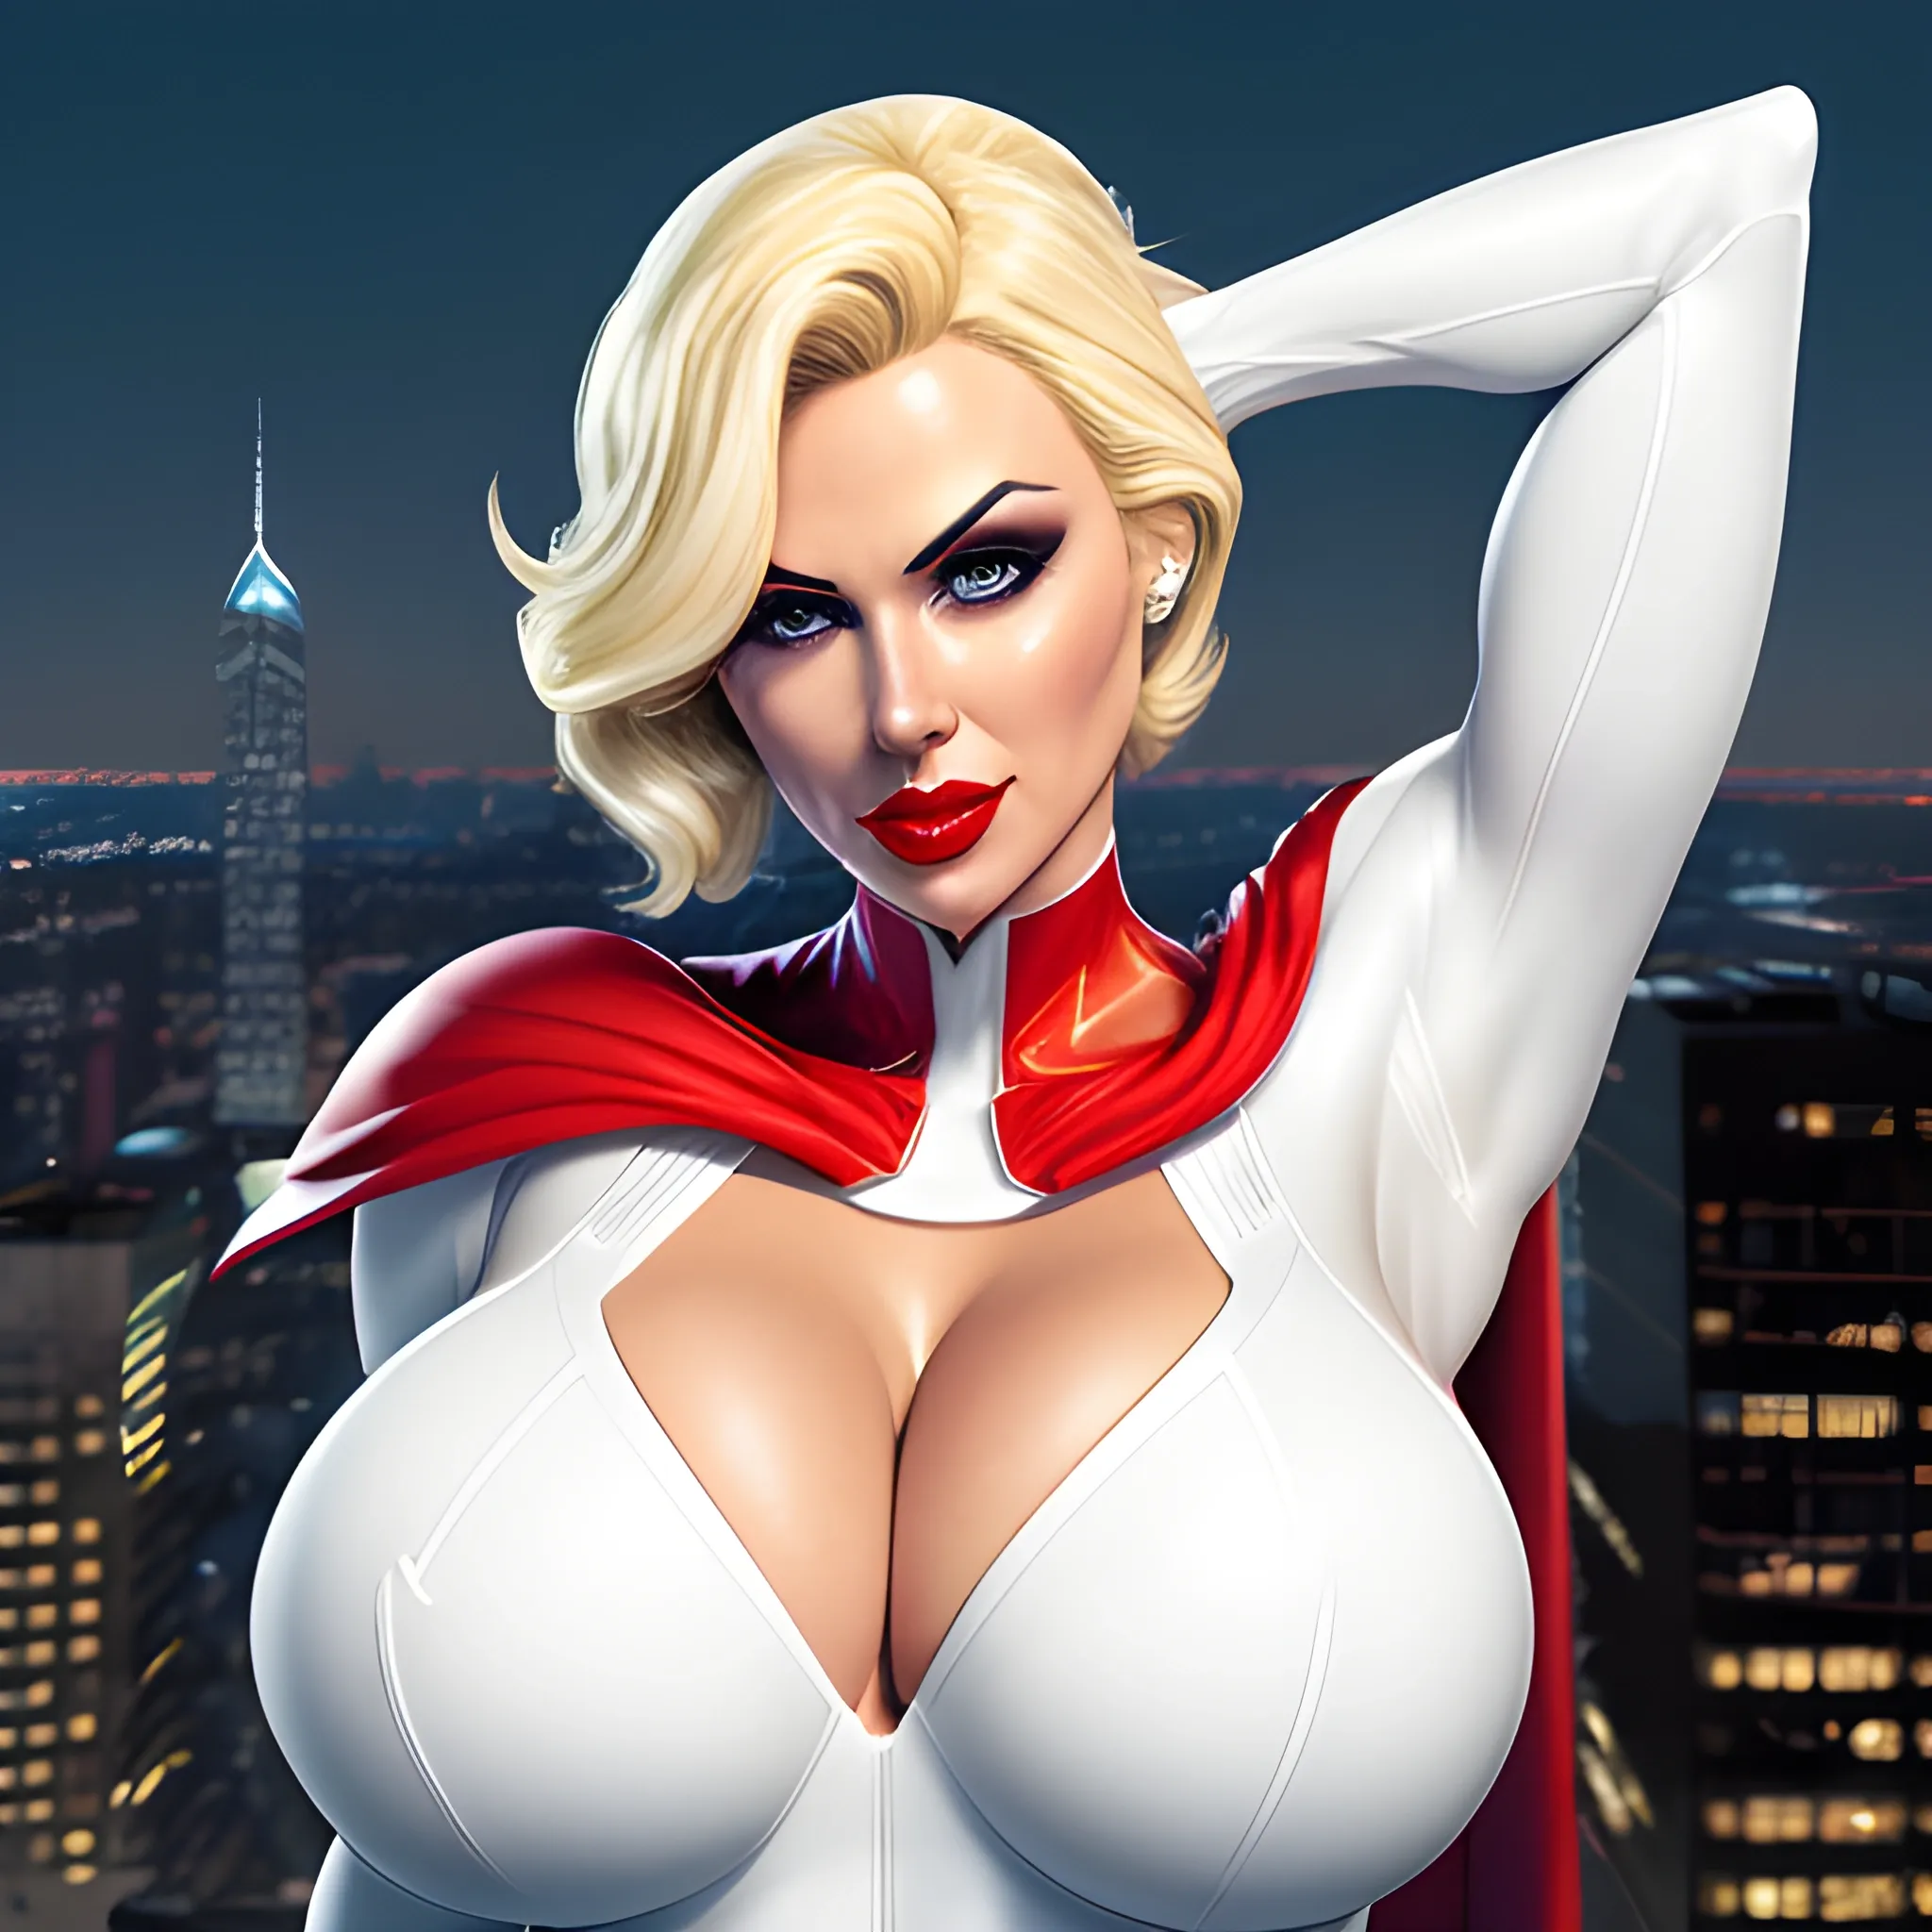 hyper beautiful hyper thick cleavage hyper realistic hyper photorealistic PowerGirl™ from DC Comics™, PowerGirl™ from DC Comics™ fan art, hyper realistic PowerGirl™ from DC Comics™ fan art, hyper dynamic short blonde hair style, wearing hyper detailed hyper classic PowerGirl™ solid white unitard costume cleavage window, wearing hyper detailed red cape attached to shoulders, wearing hyper detailed blue gloves, hyper detailed city lights at night background